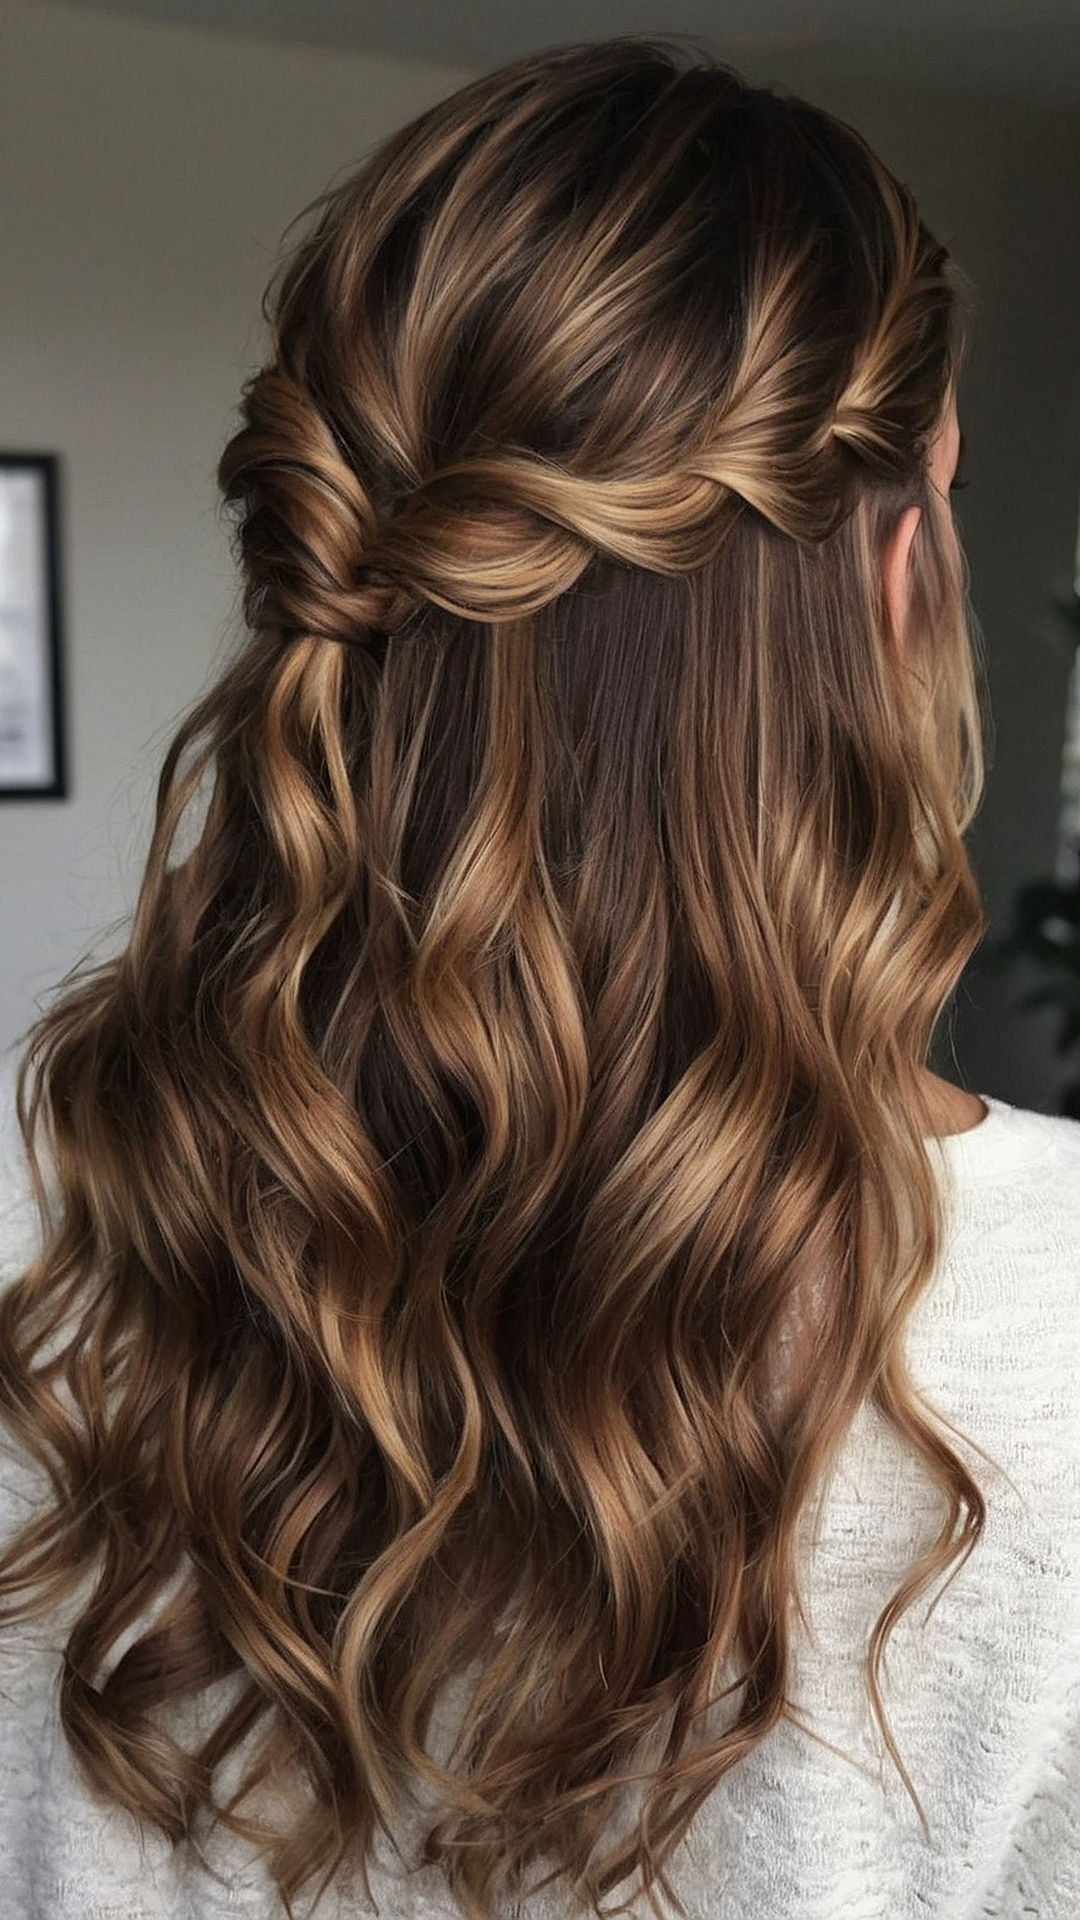 Wavy Delight: Radiant Hair Styles for Waves